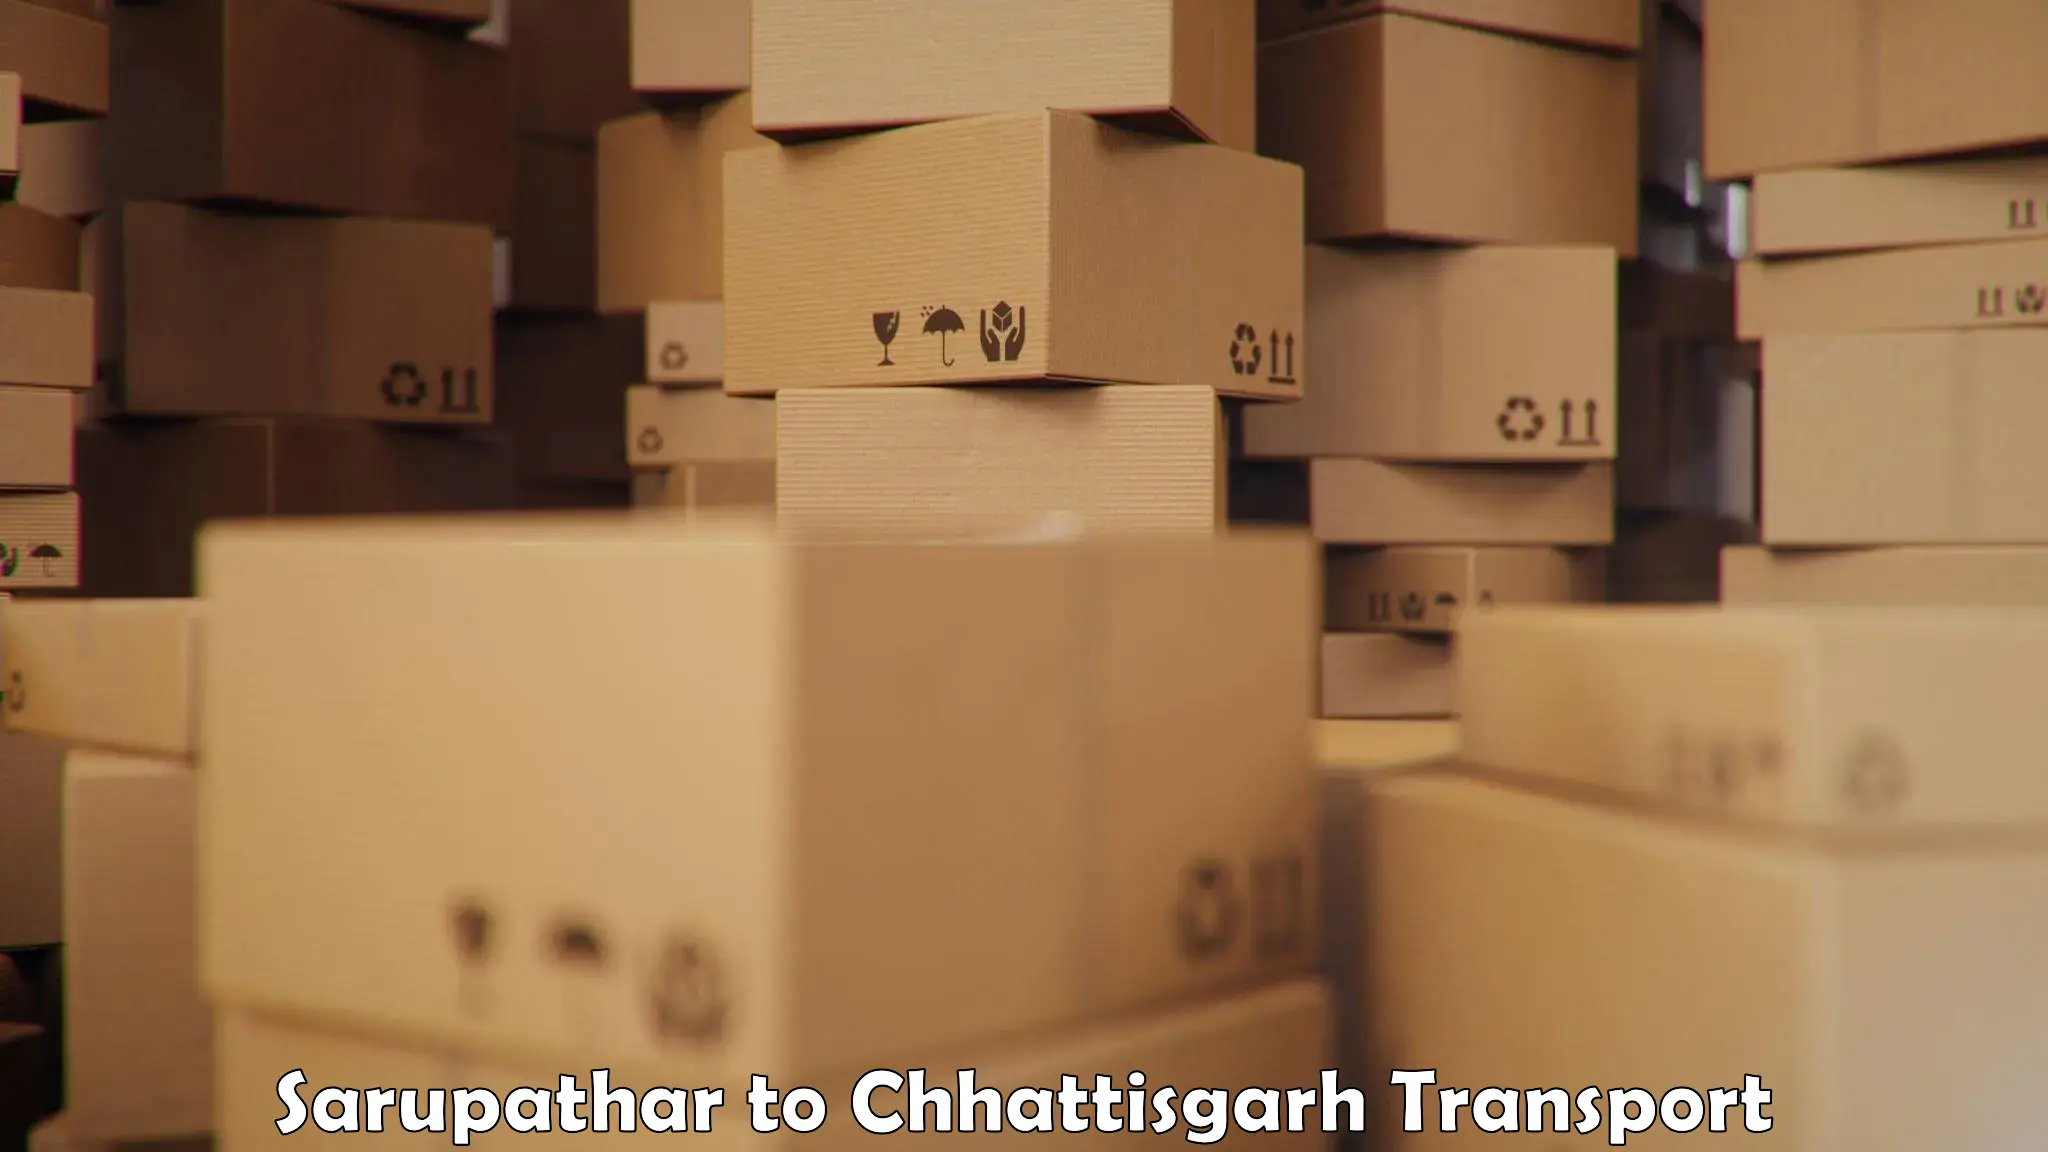 Truck transport companies in India in Sarupathar to Kharsia